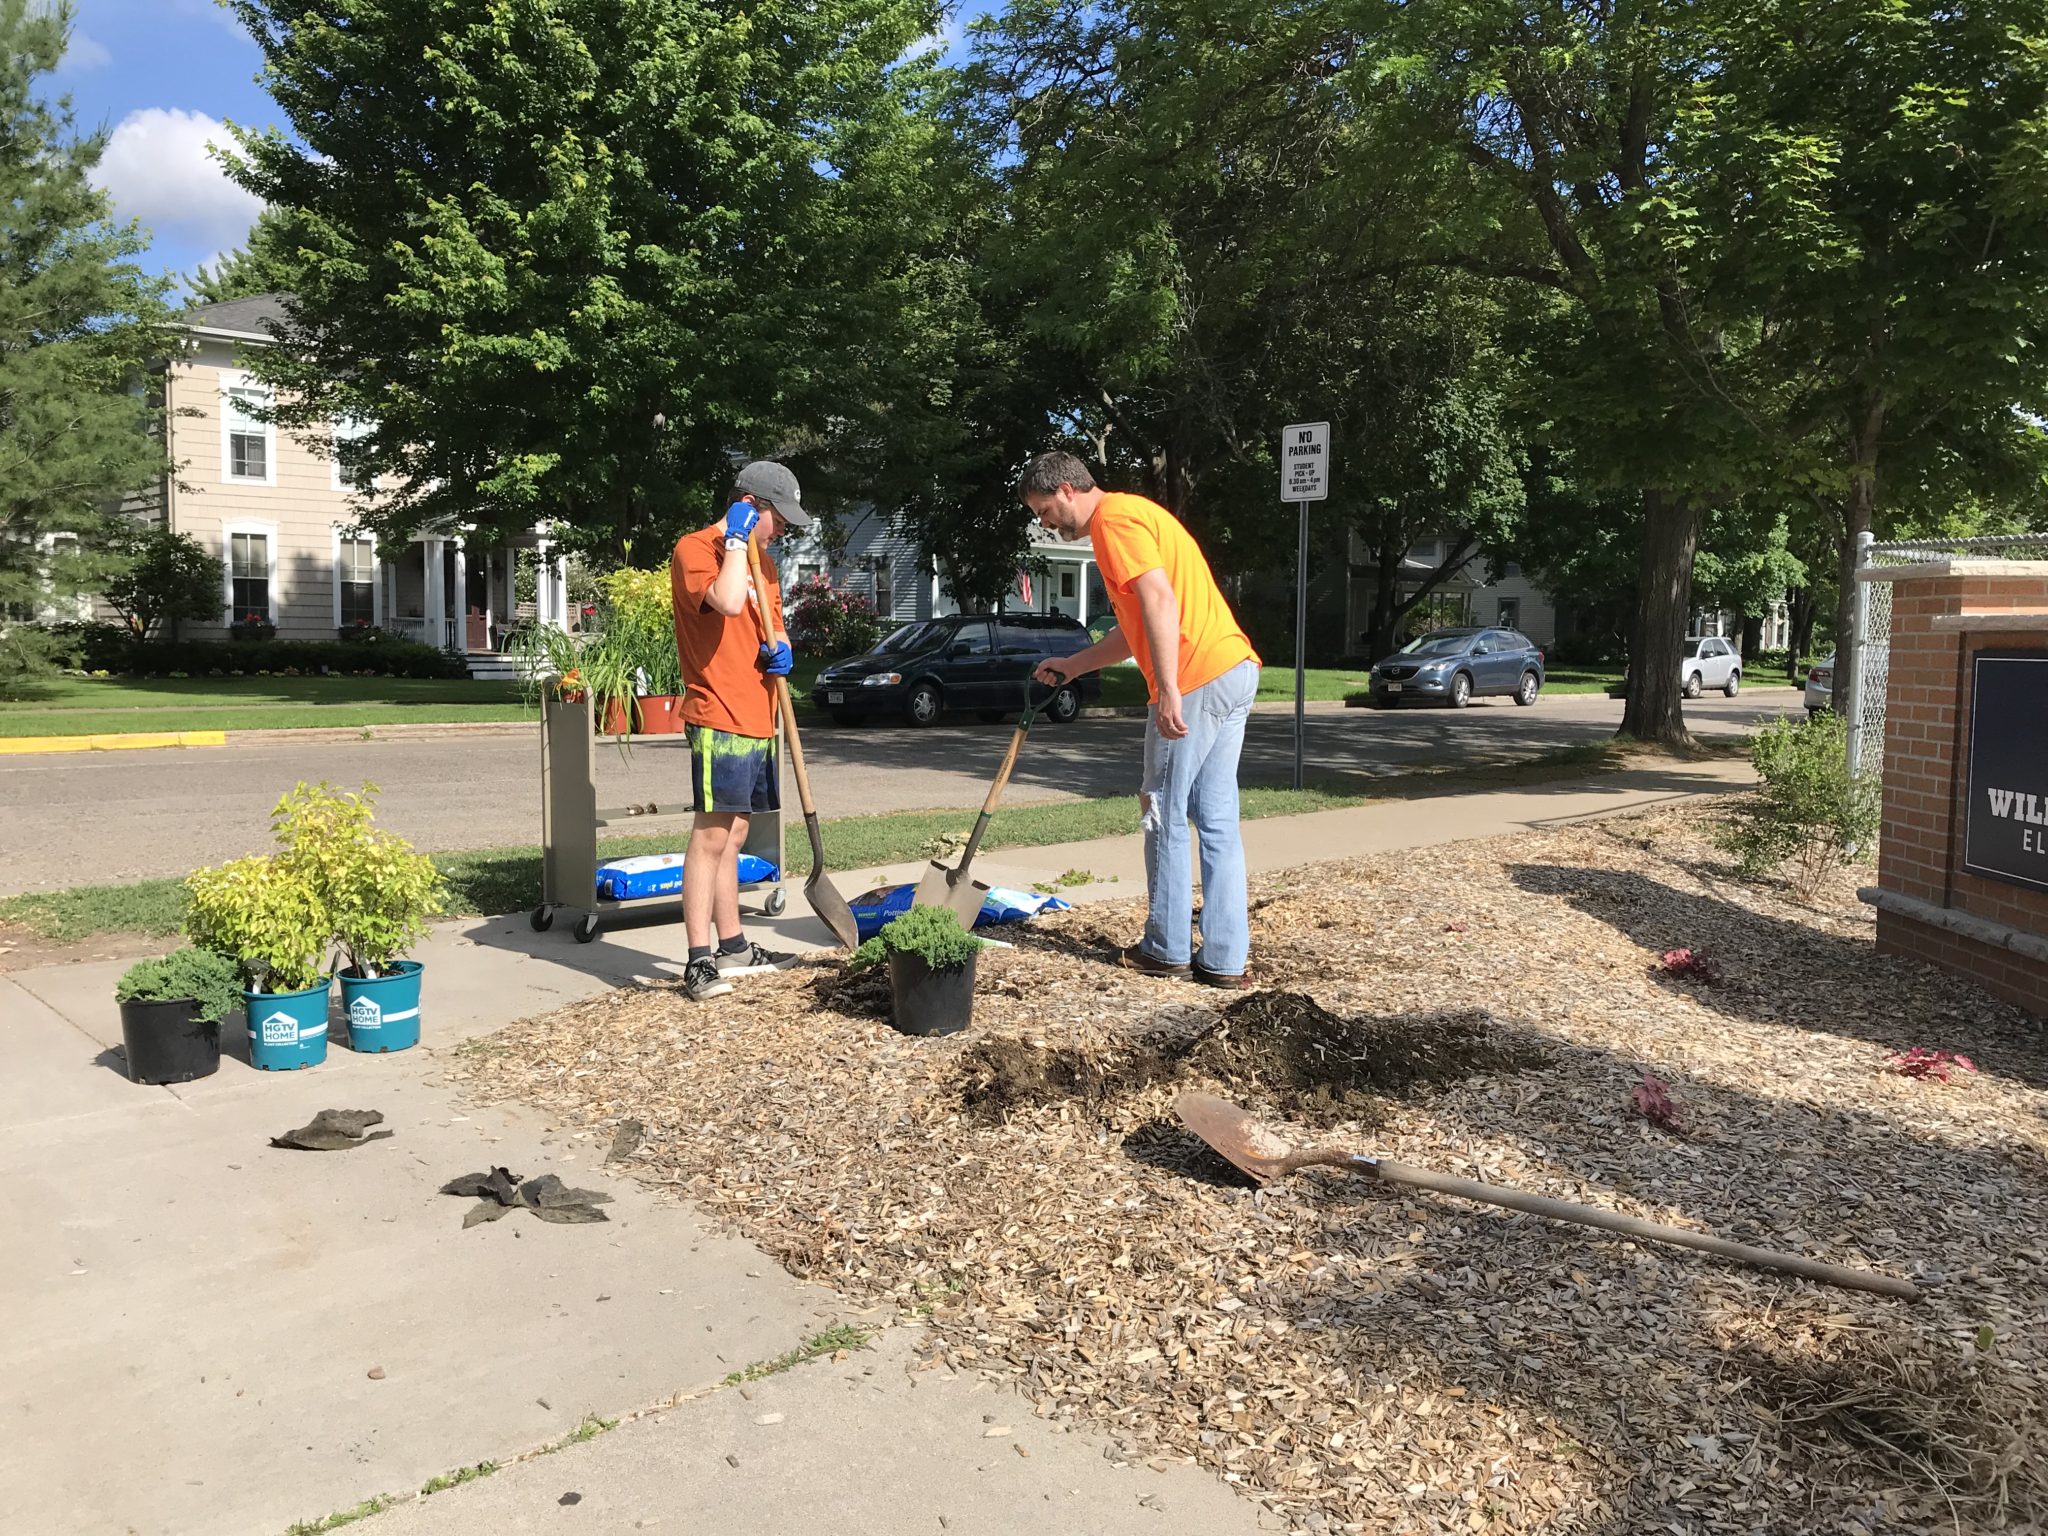 Two volunteers are planting shrubs near the Willow River Elementary School sign.